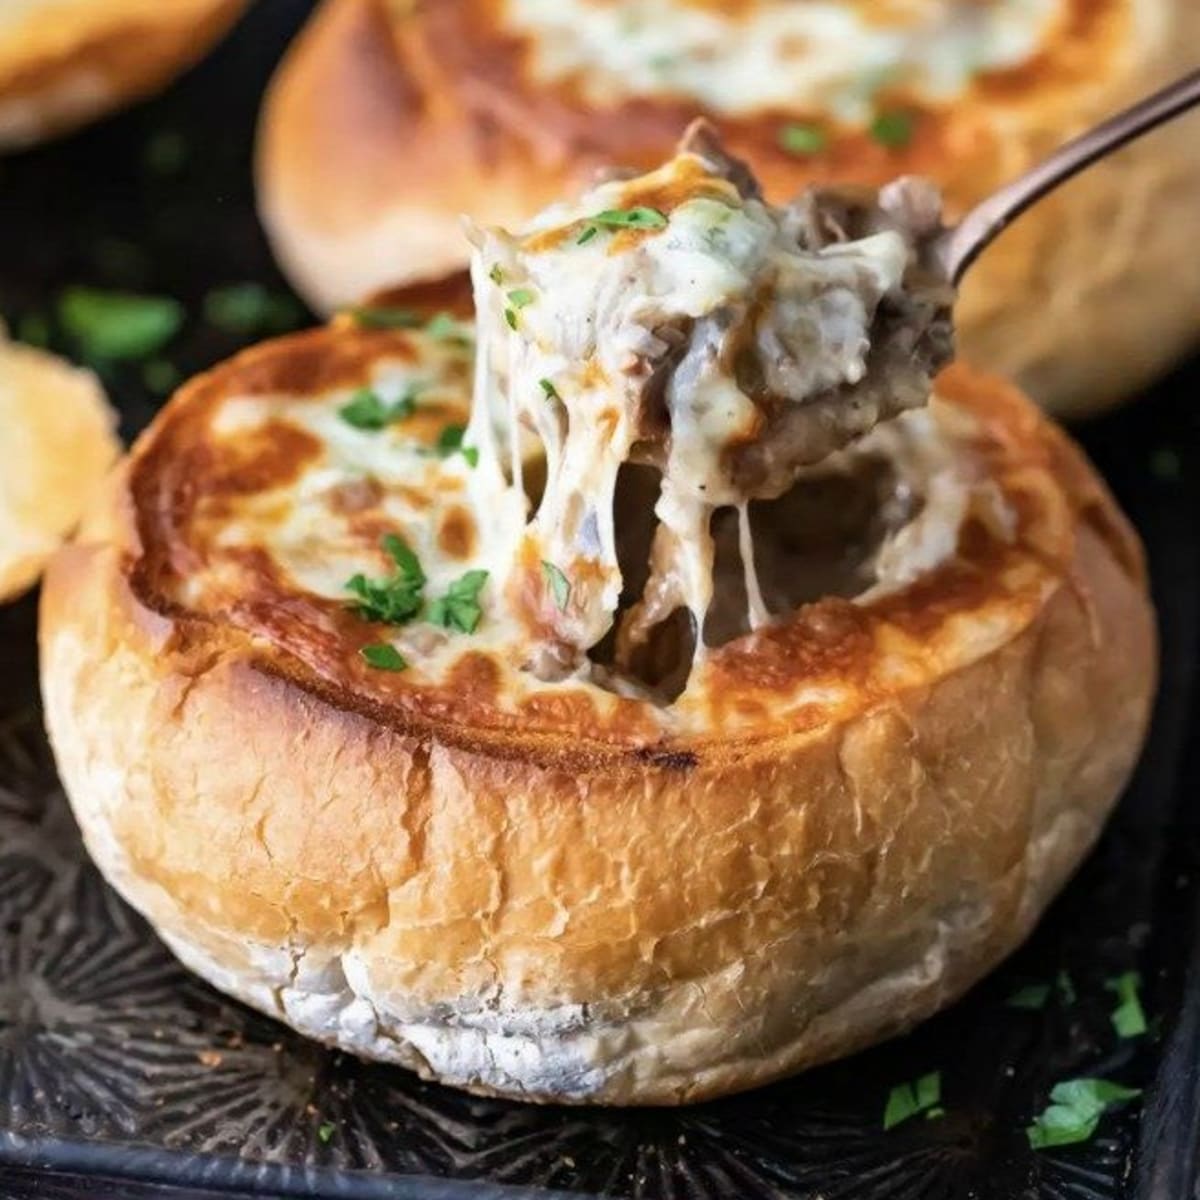 What kind of bread is good for bread bowls?